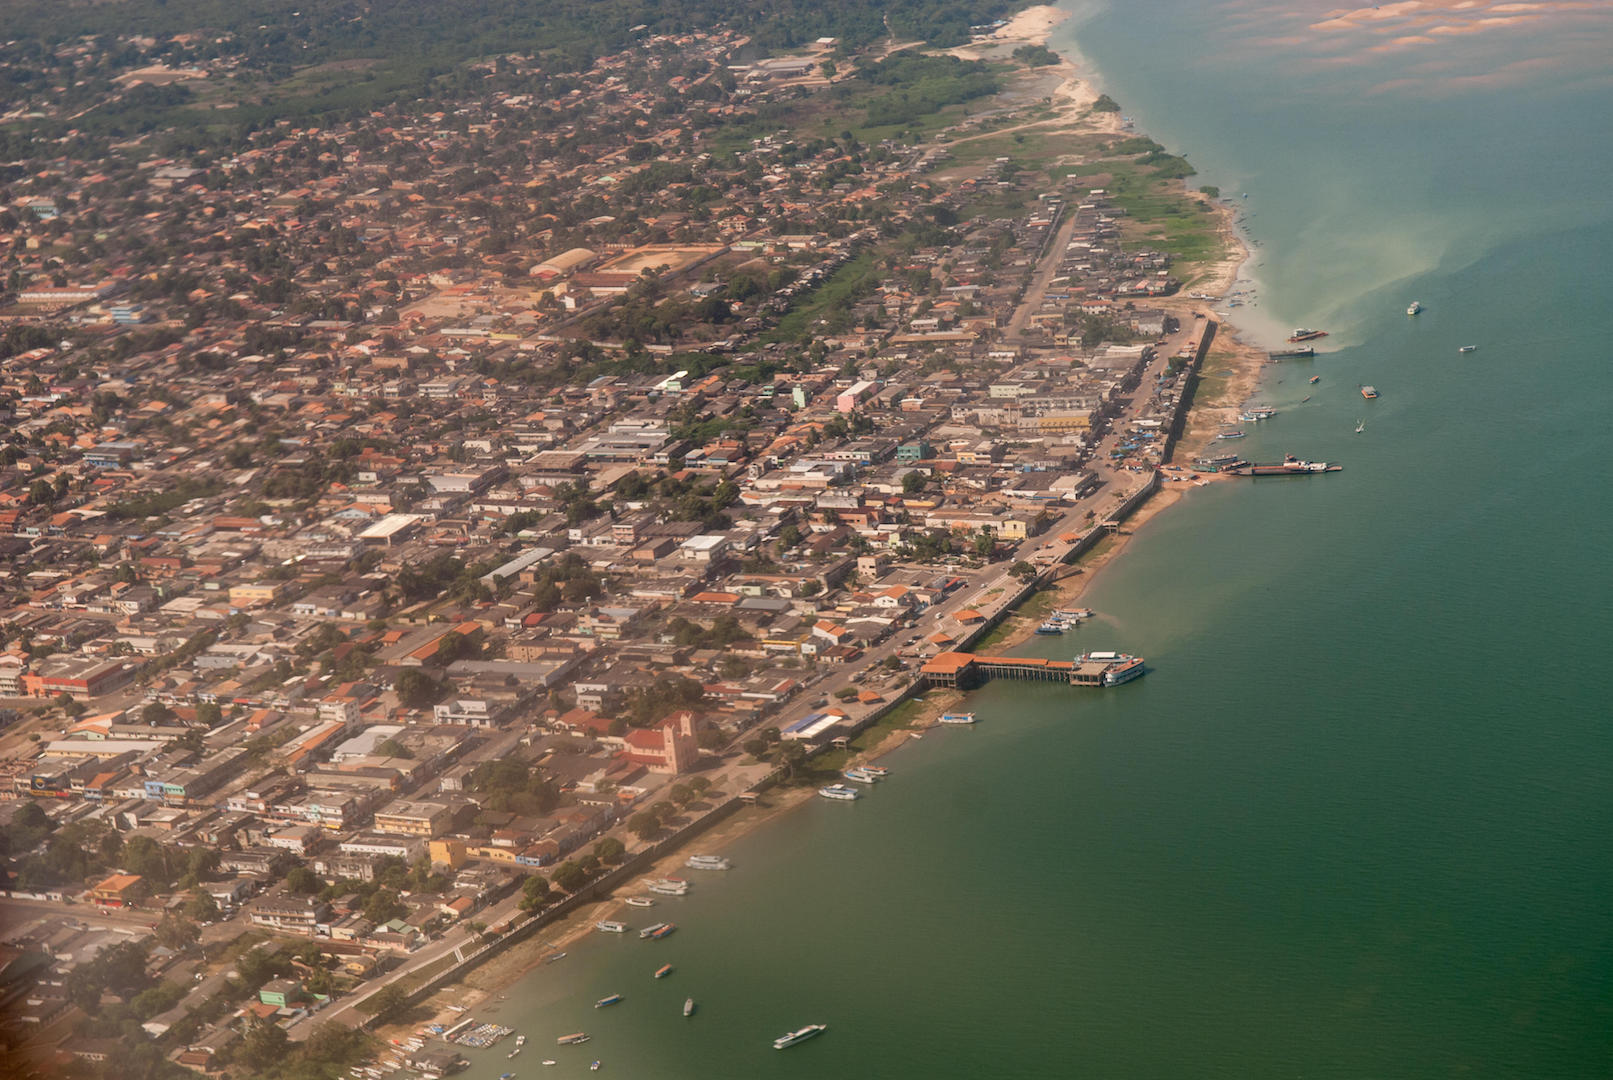 Aerial view of Itaituba and the tapajos river